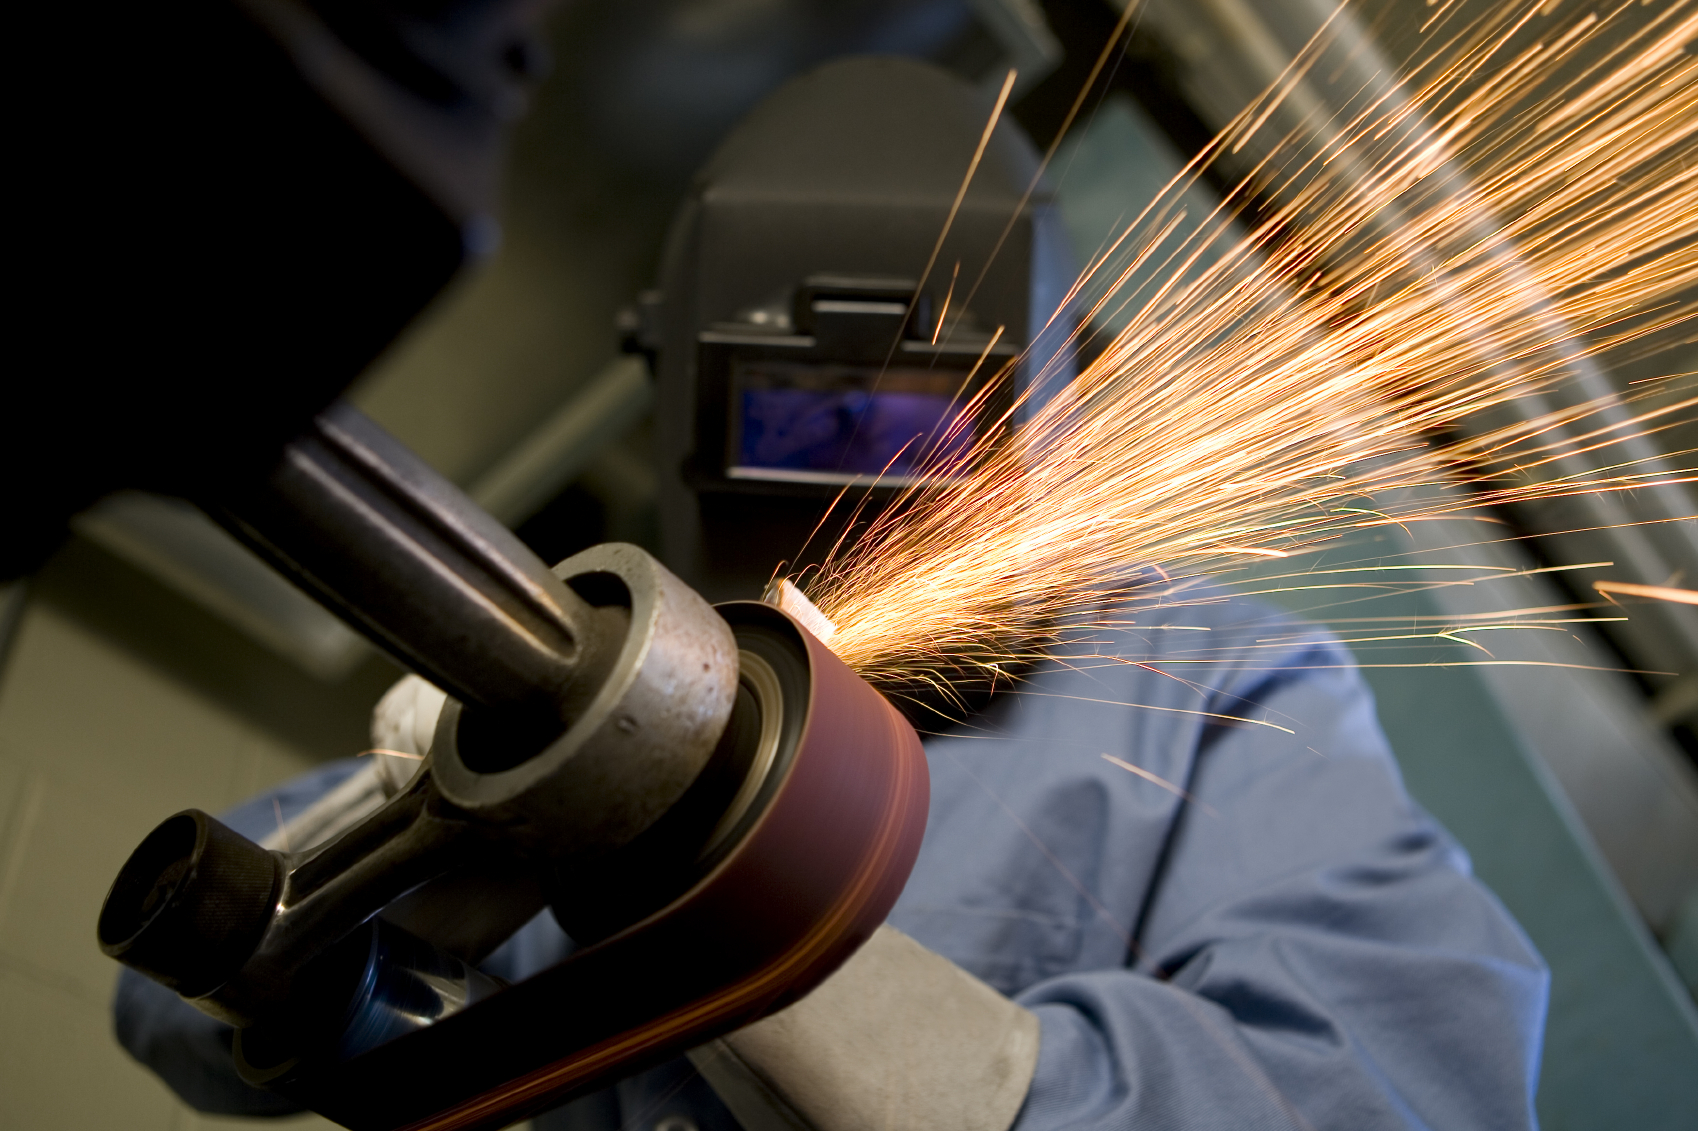 A picture of someone working with a power grinder